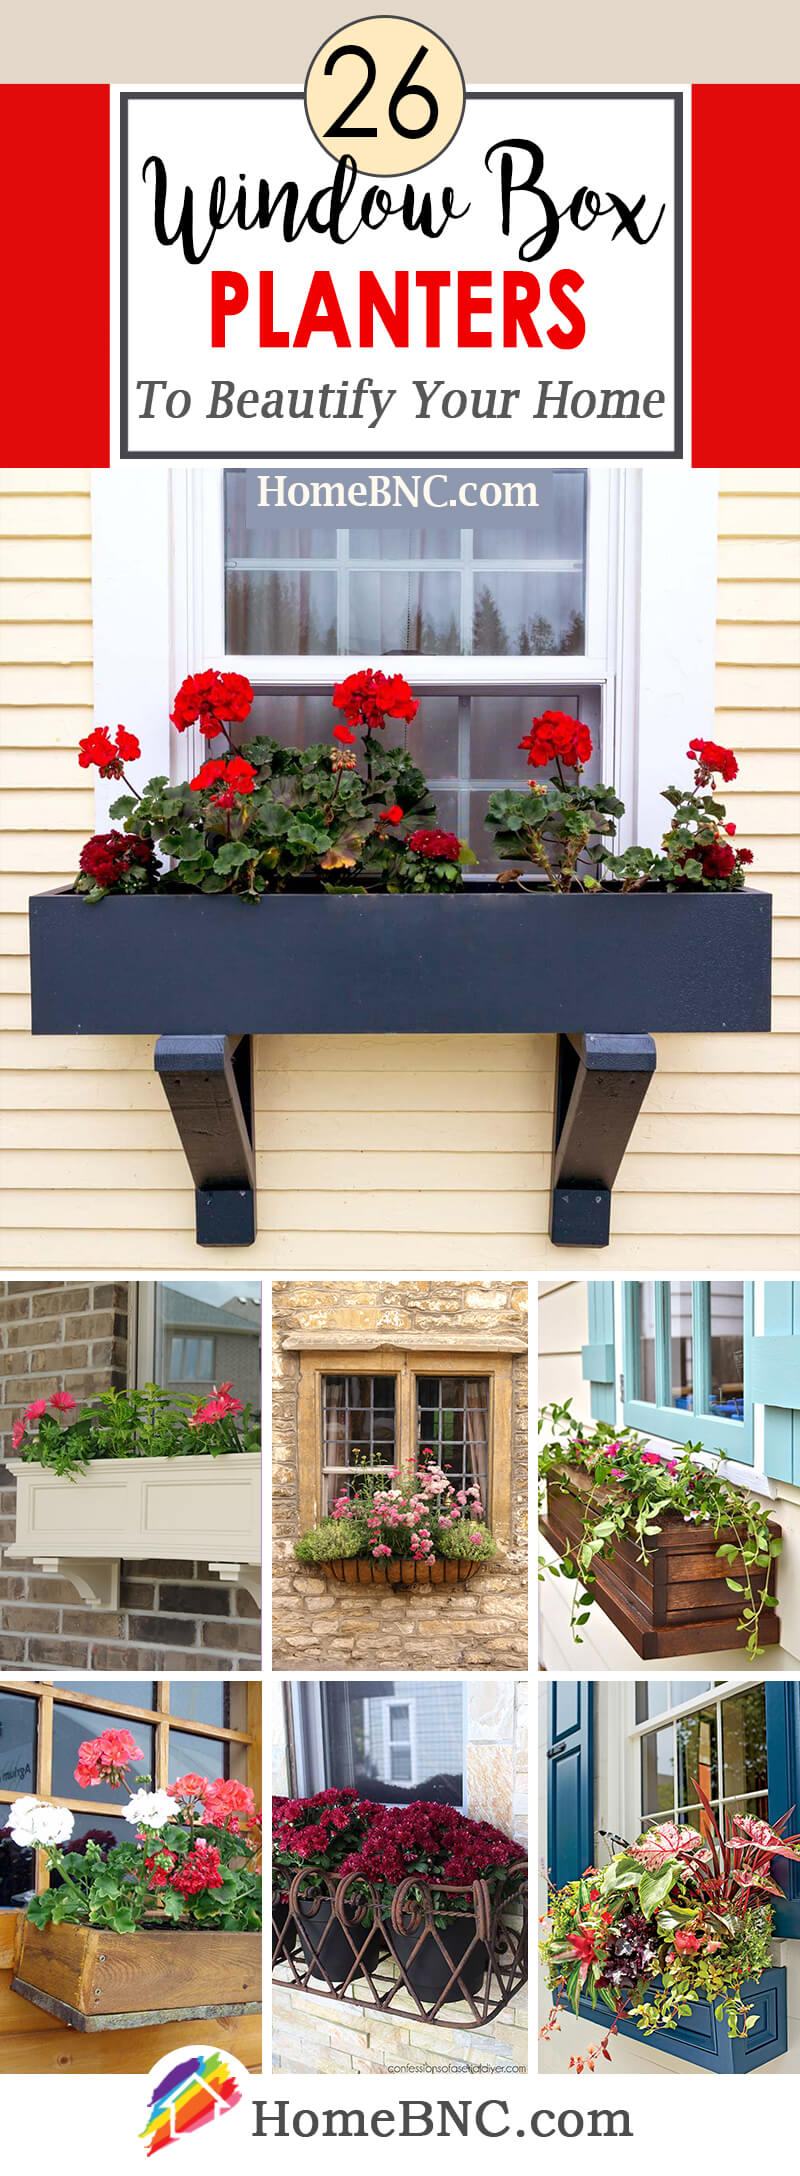 20 Best Window Box Planter Ideas and Designs for 20